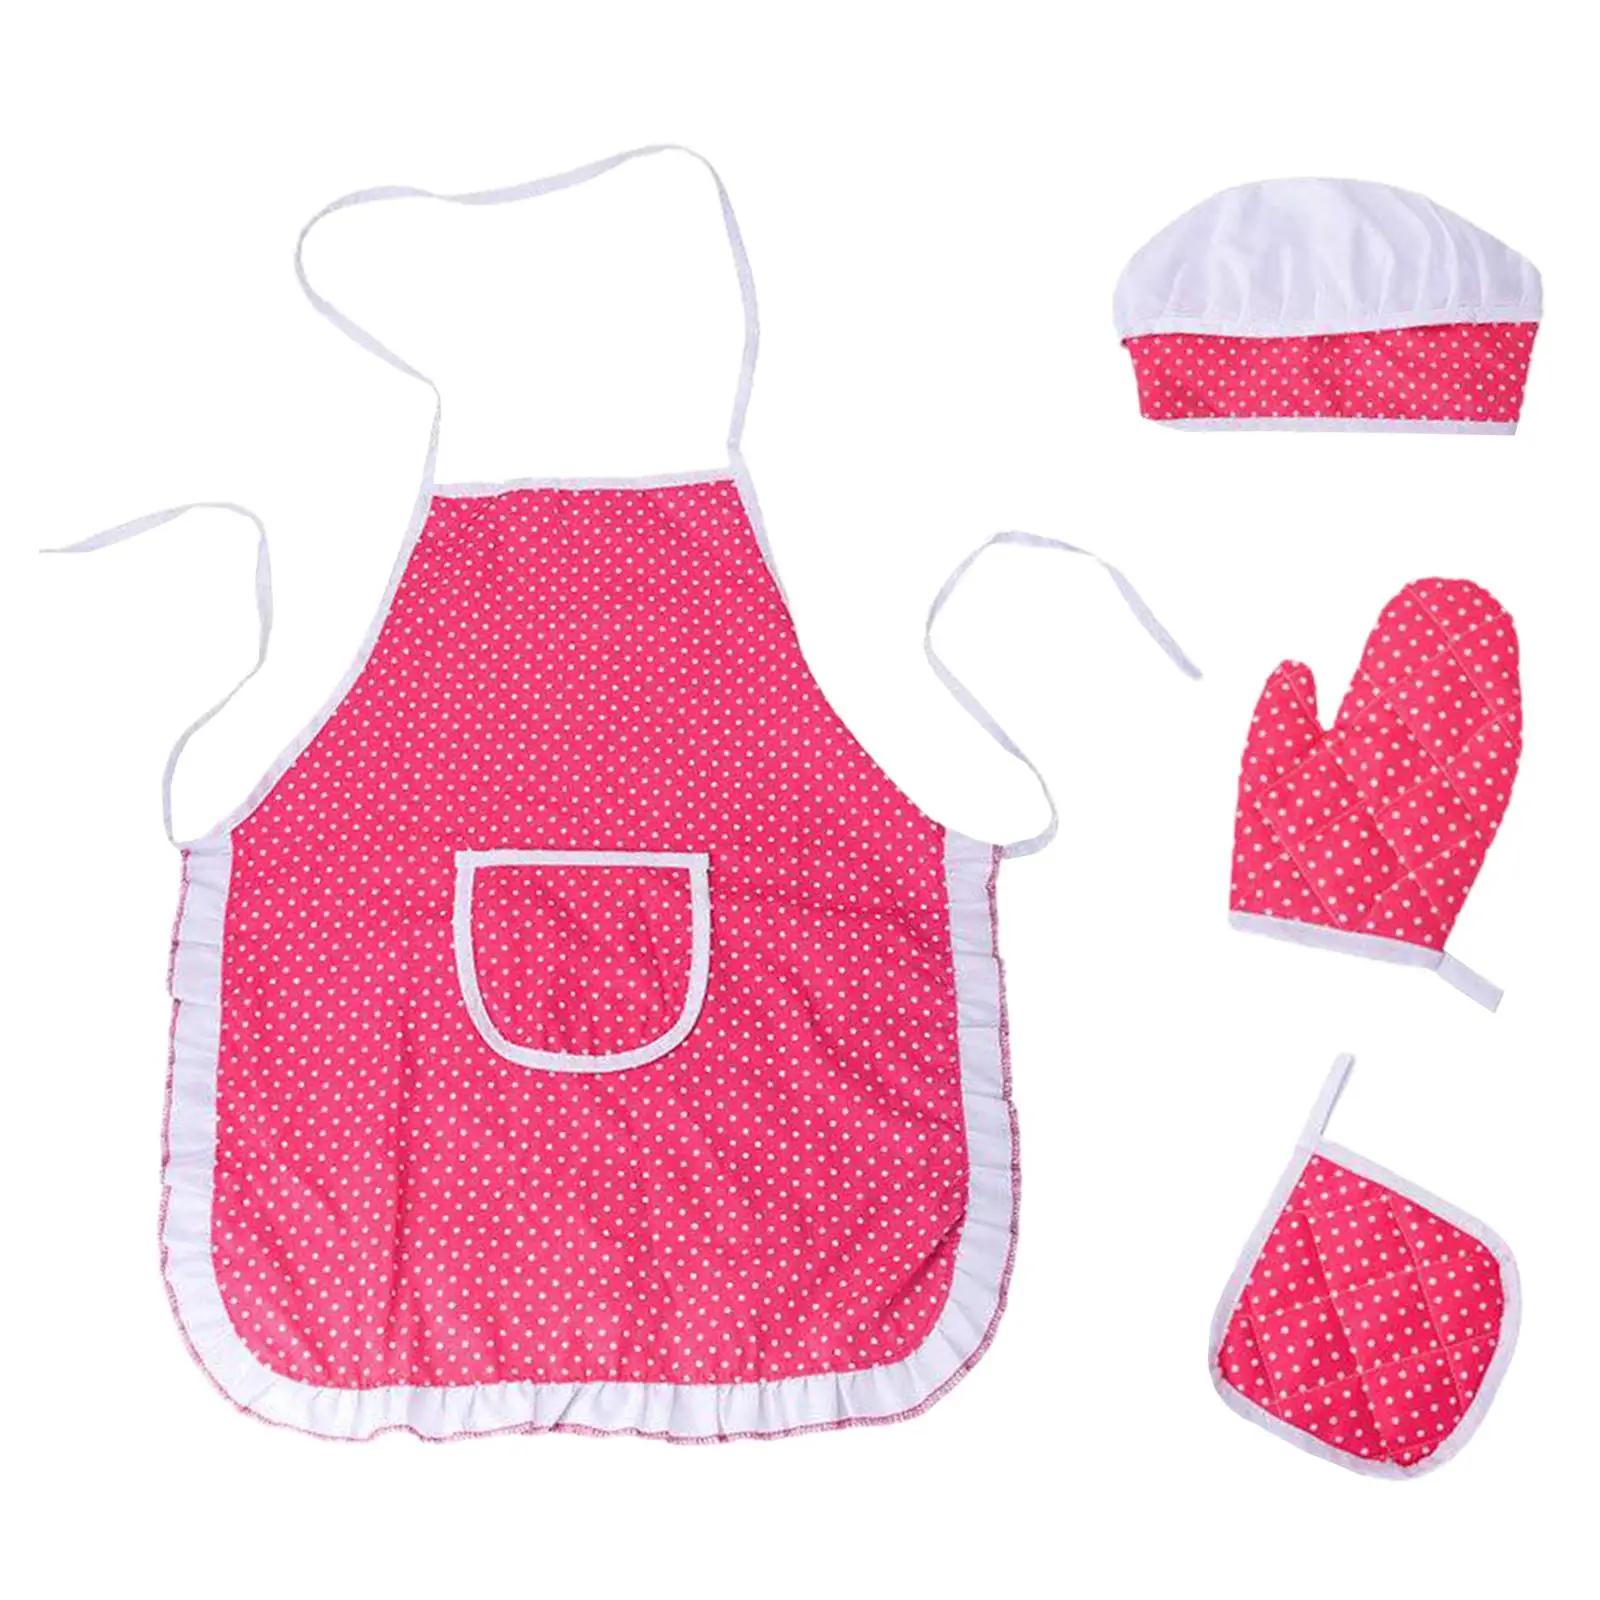 4 Pcs  Role Play Costume Set,  Toddlers Cooking and Baking Set, Apron, Hat, Oven   Pad